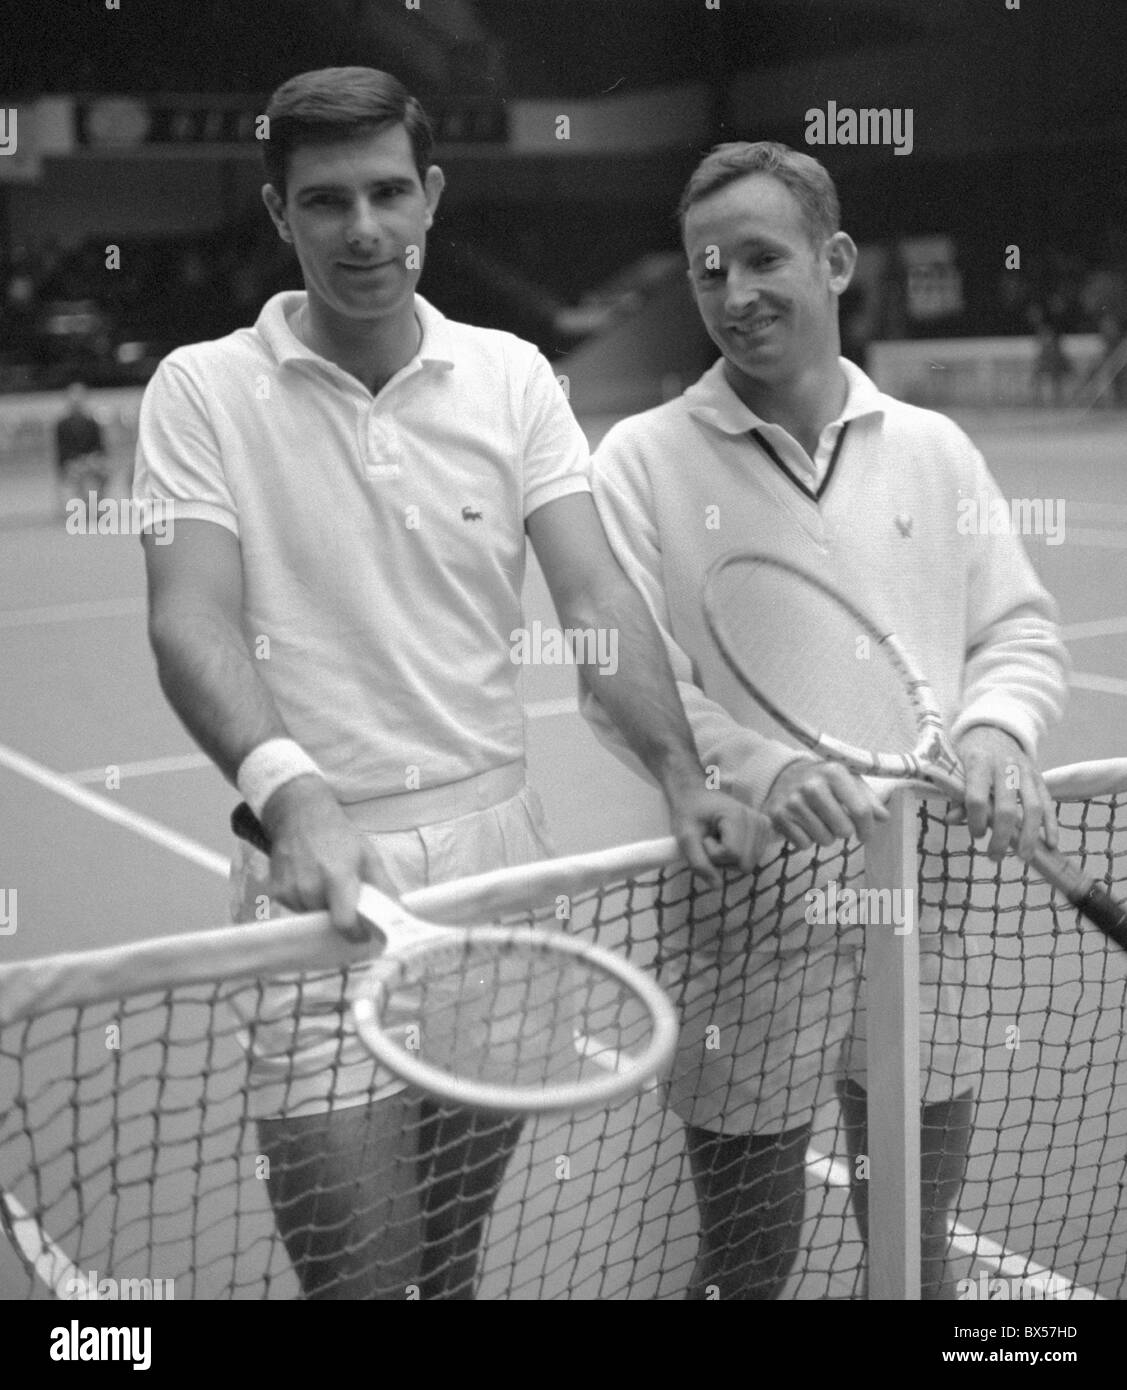 Tennis players Butch Buchholz and Rod Laver Stock Photo - Alamy